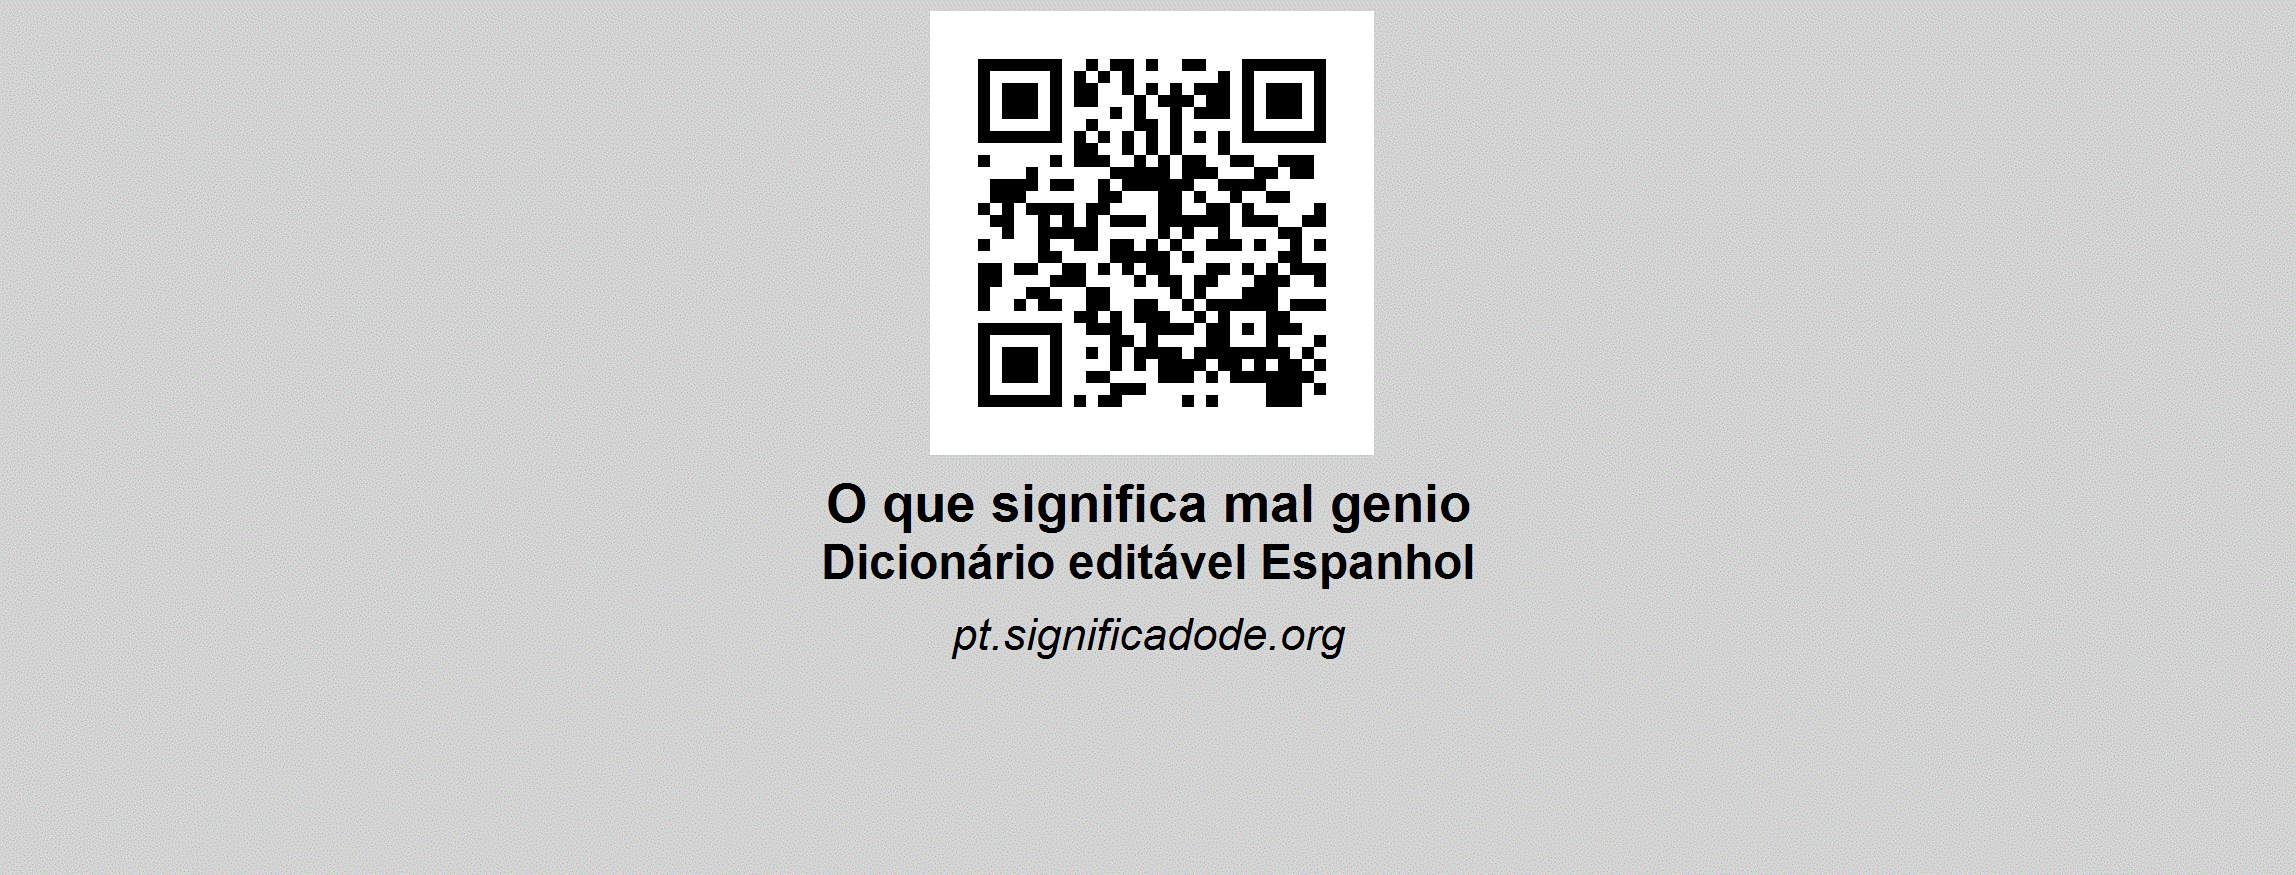 https://imgpt.significadode.org/portugues/que-significa/grande/mal%20genio.gif